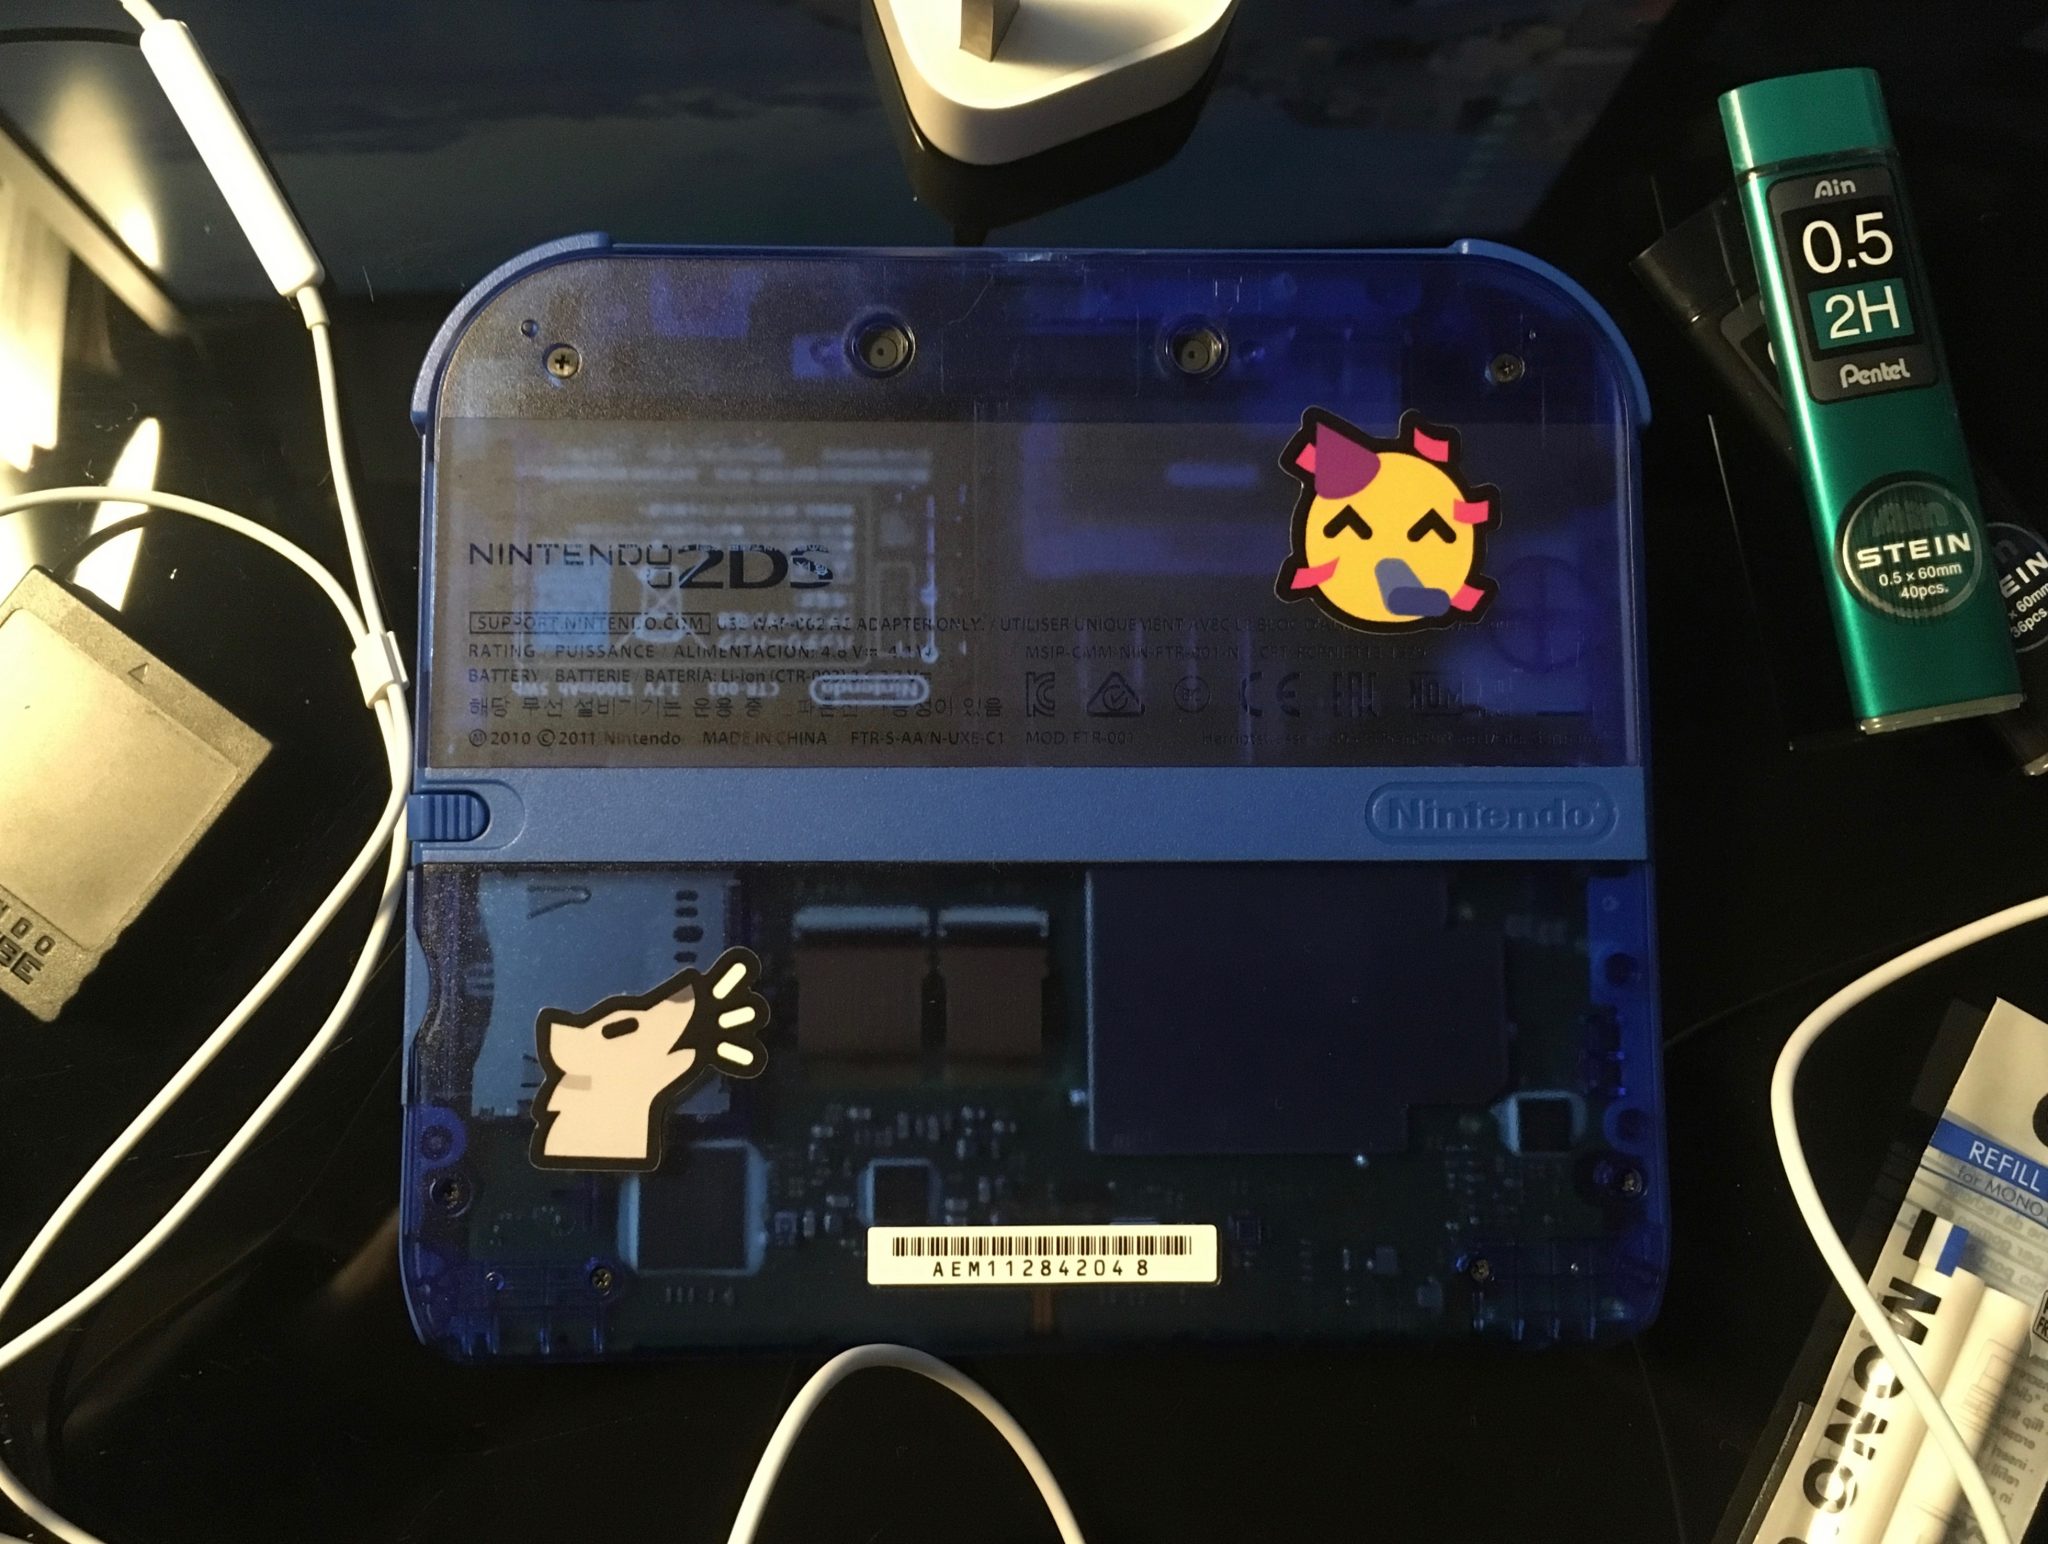 The back of a transparent blue Nintendo 2DS face down on a desk. It has a party face sticker on the top right and an awoo sticker on the bottom left. It is surrounded by different objects - white headphone cable, Nintendo GameCube black memory card and mechanical pencil and eraser refills.